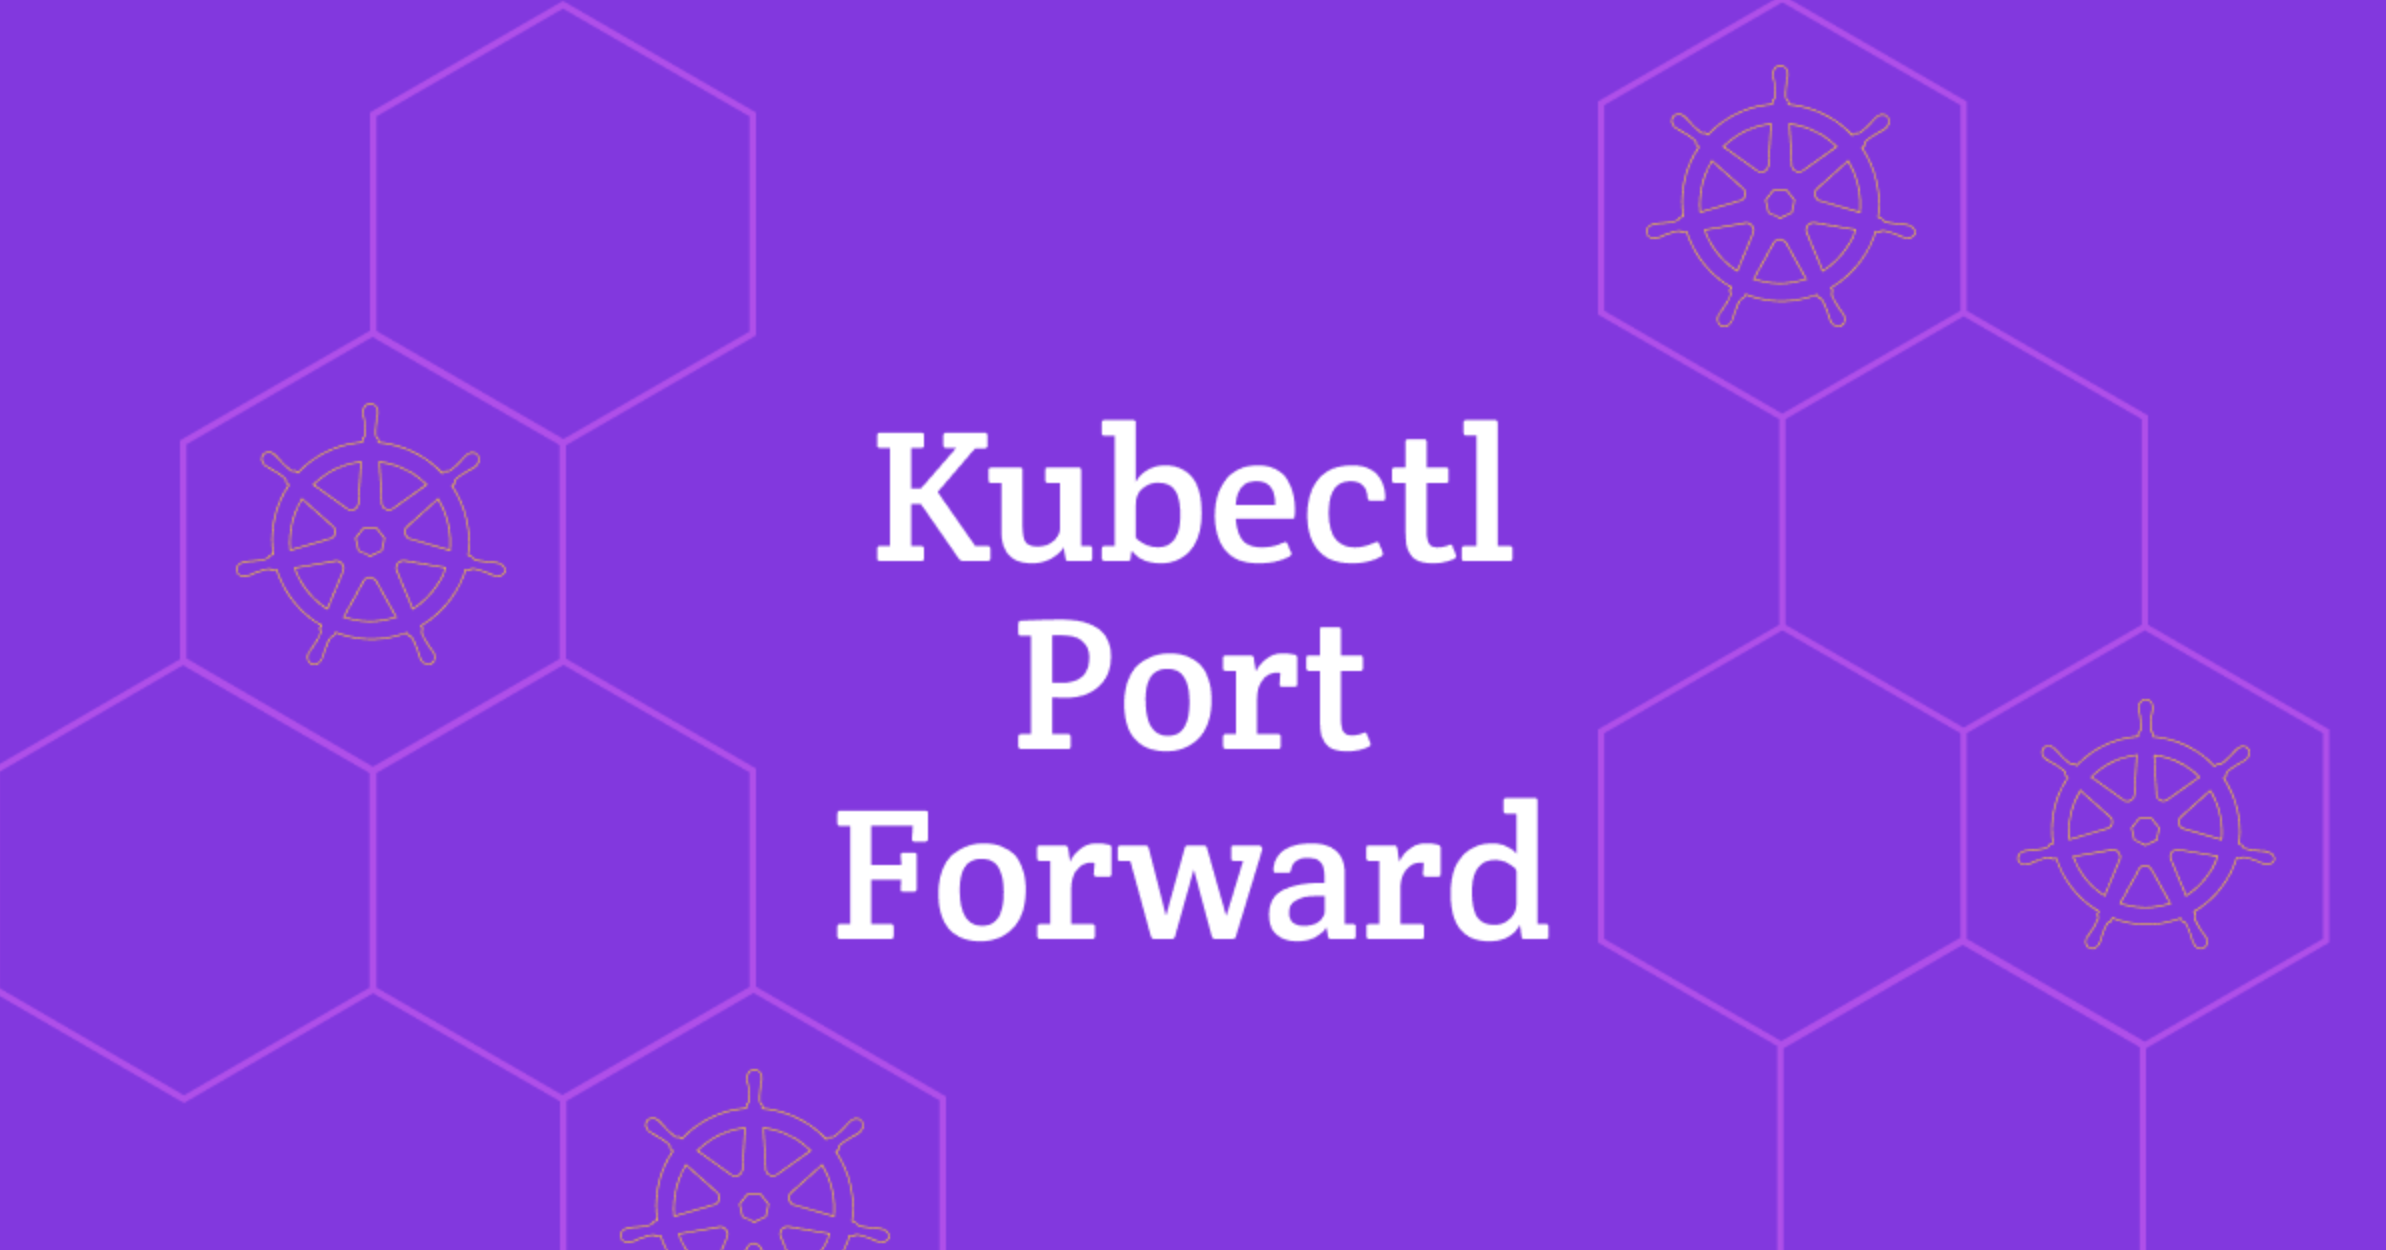 How to connect from your local environment to a private Postgres server through a kubernetes service?